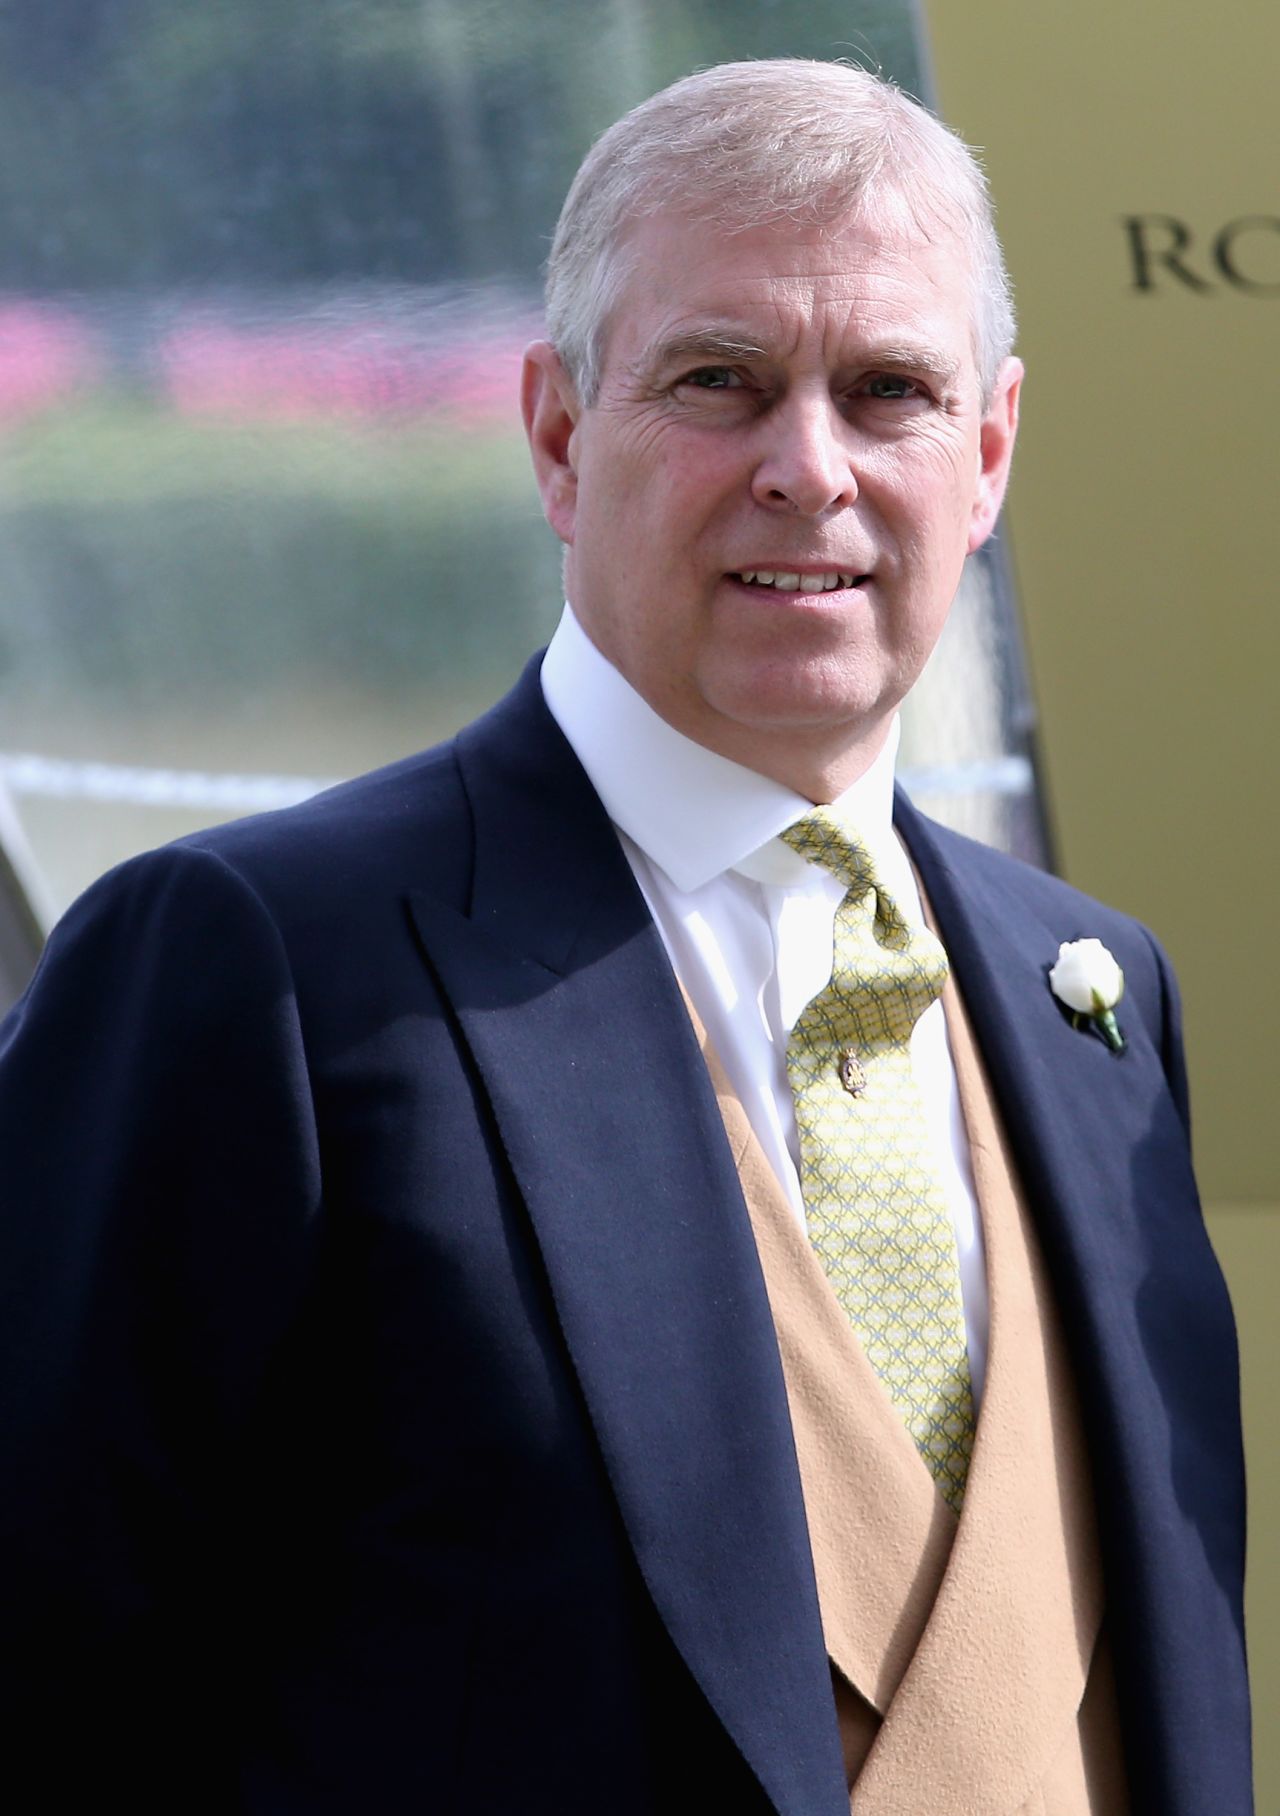 In January 2014, Buckingham Palace issued a statement denying that Prince Andrew had "any form of sexual contact or relationship" with a woman who had named him in a sex abuse lawsuit linked to Epstein.